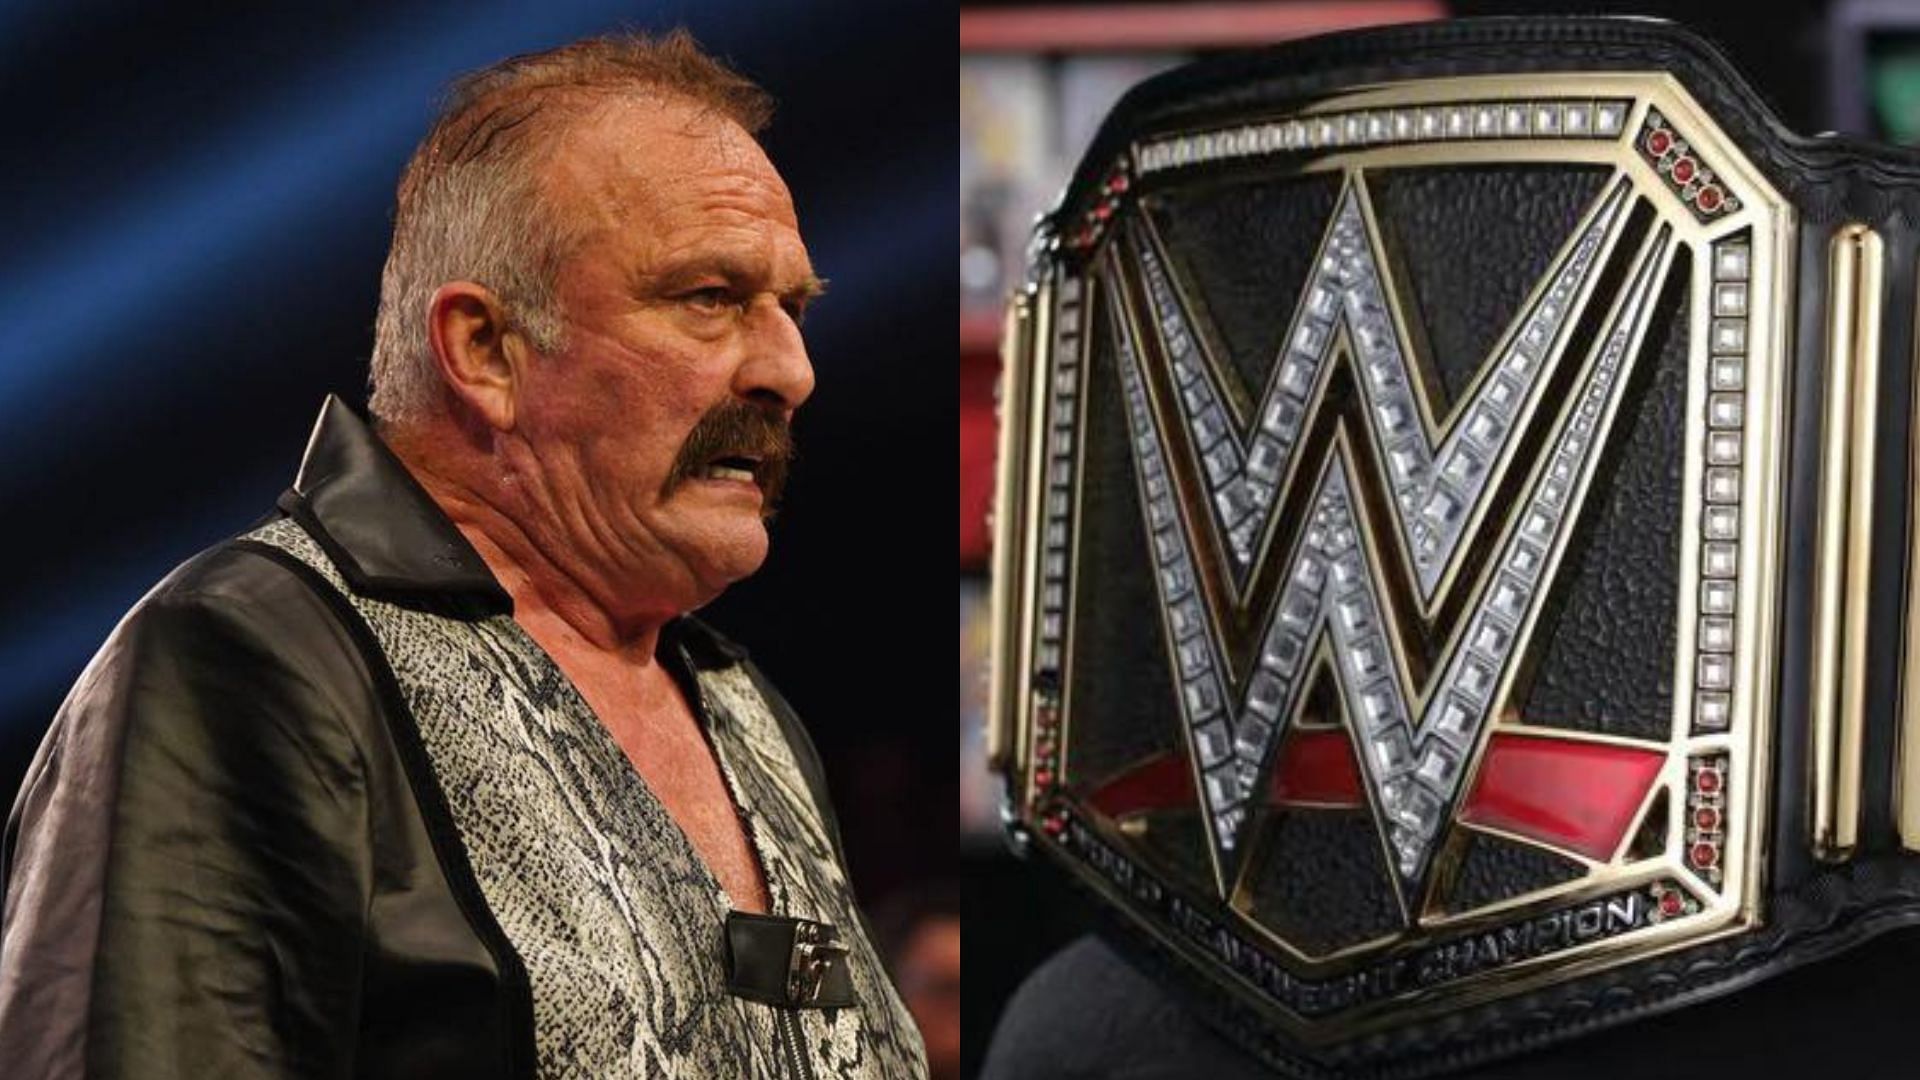 Jake Roberts has admitted people were jealous of a former WWE Champion